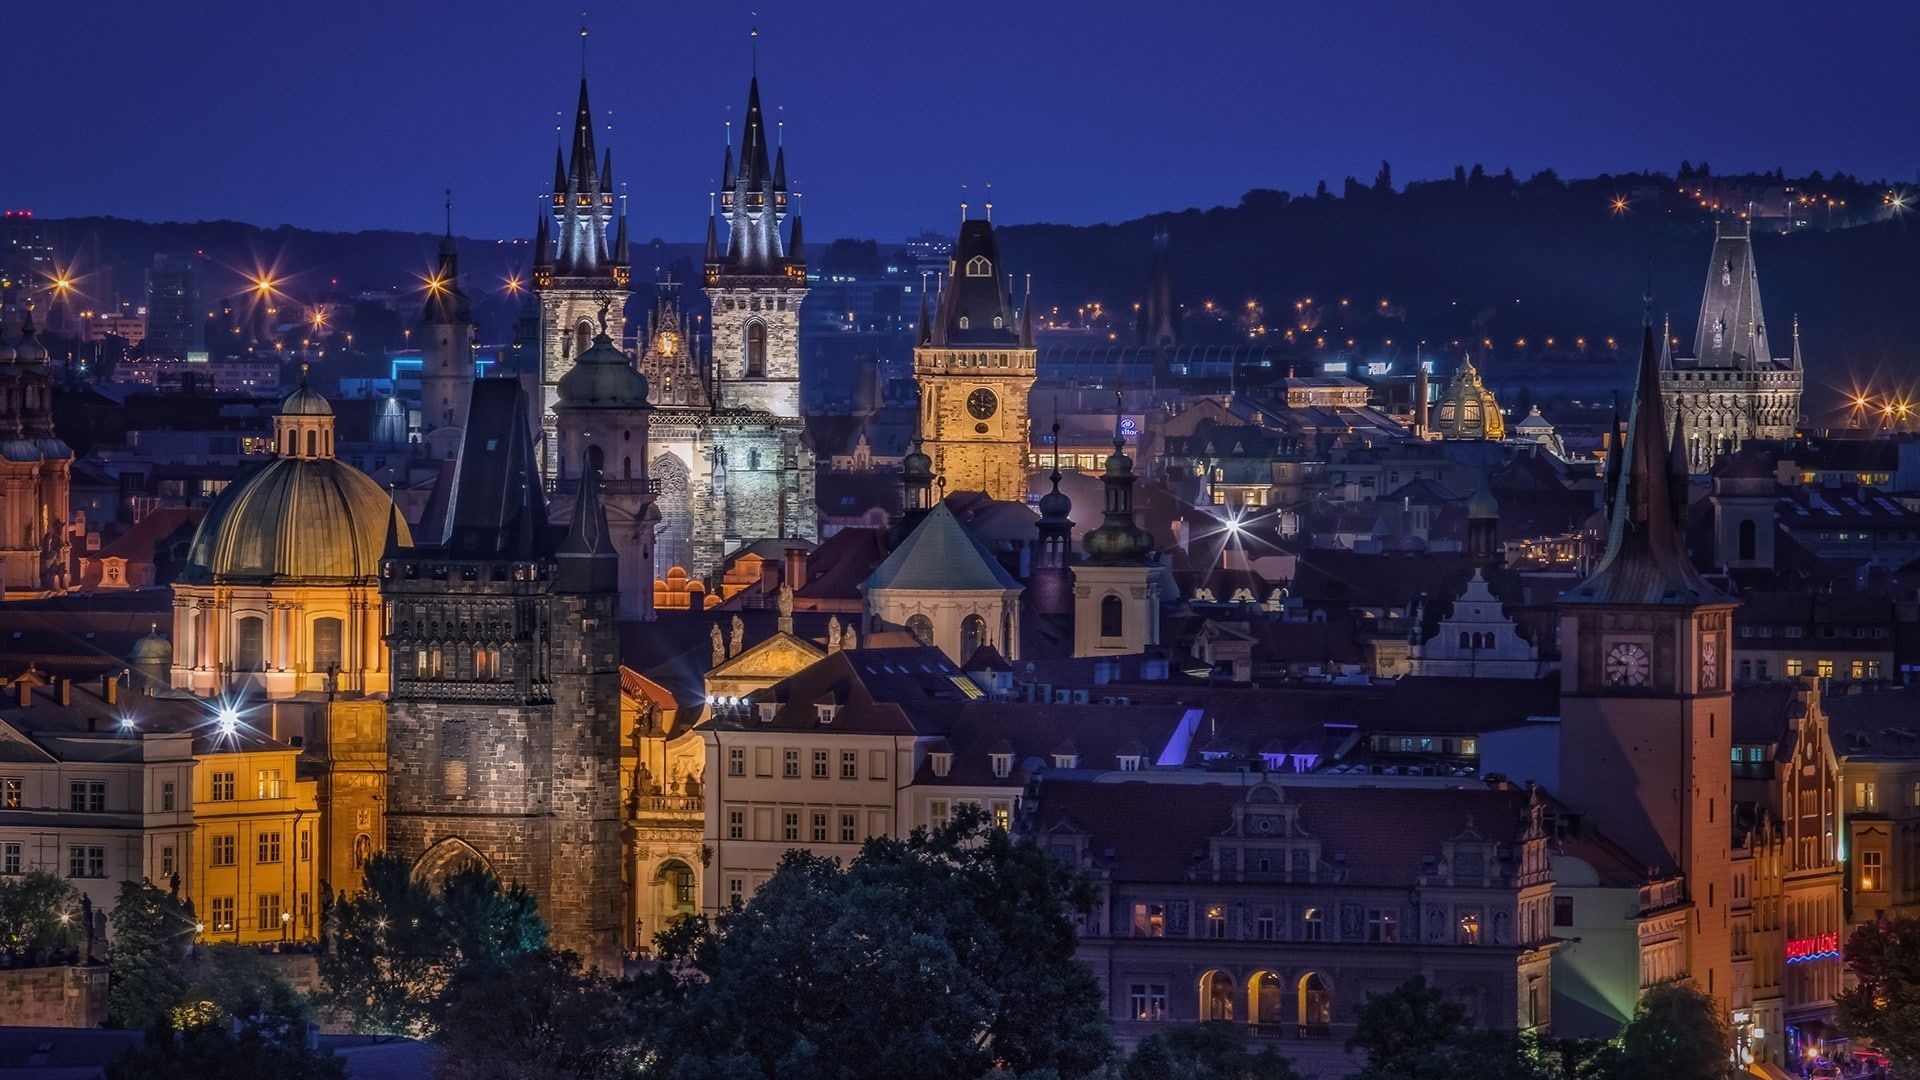 Czechia (Czech Republic): A Gothic church, A dominant feature of the Old Town of Prague. 1920x1080 Full HD Background.